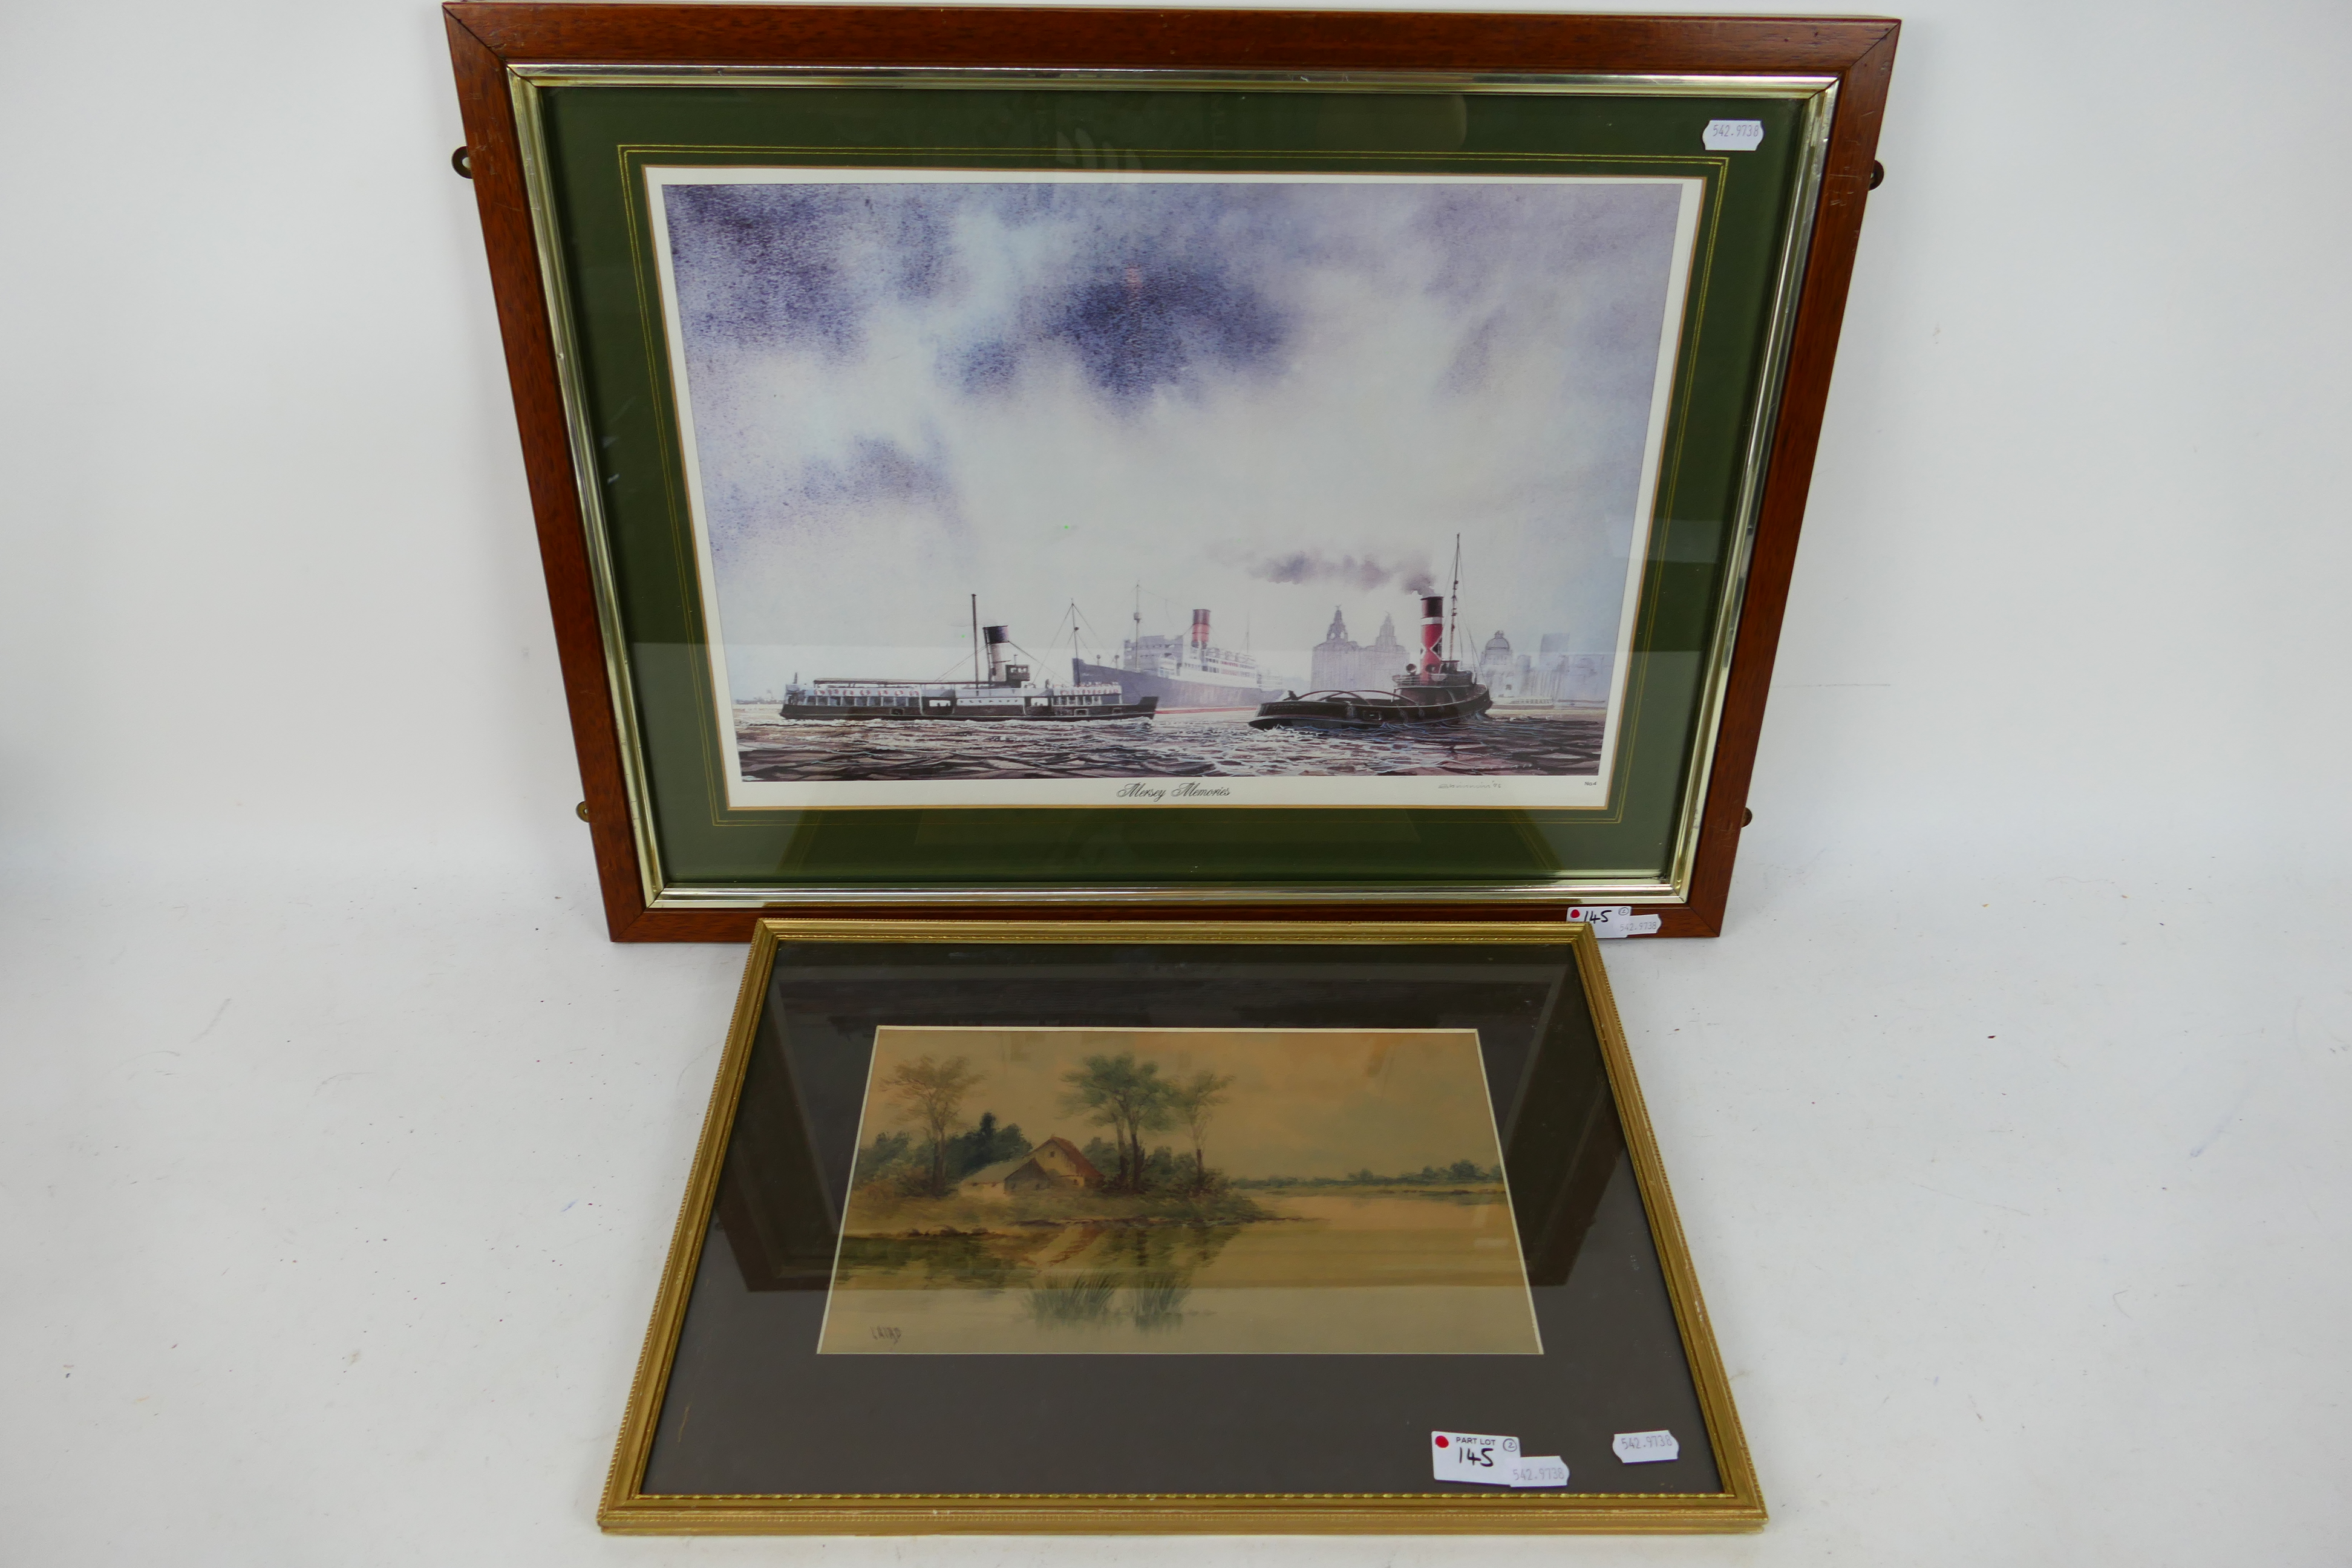 A print depicting boats on the River Mersey, mounted and framed under glass,